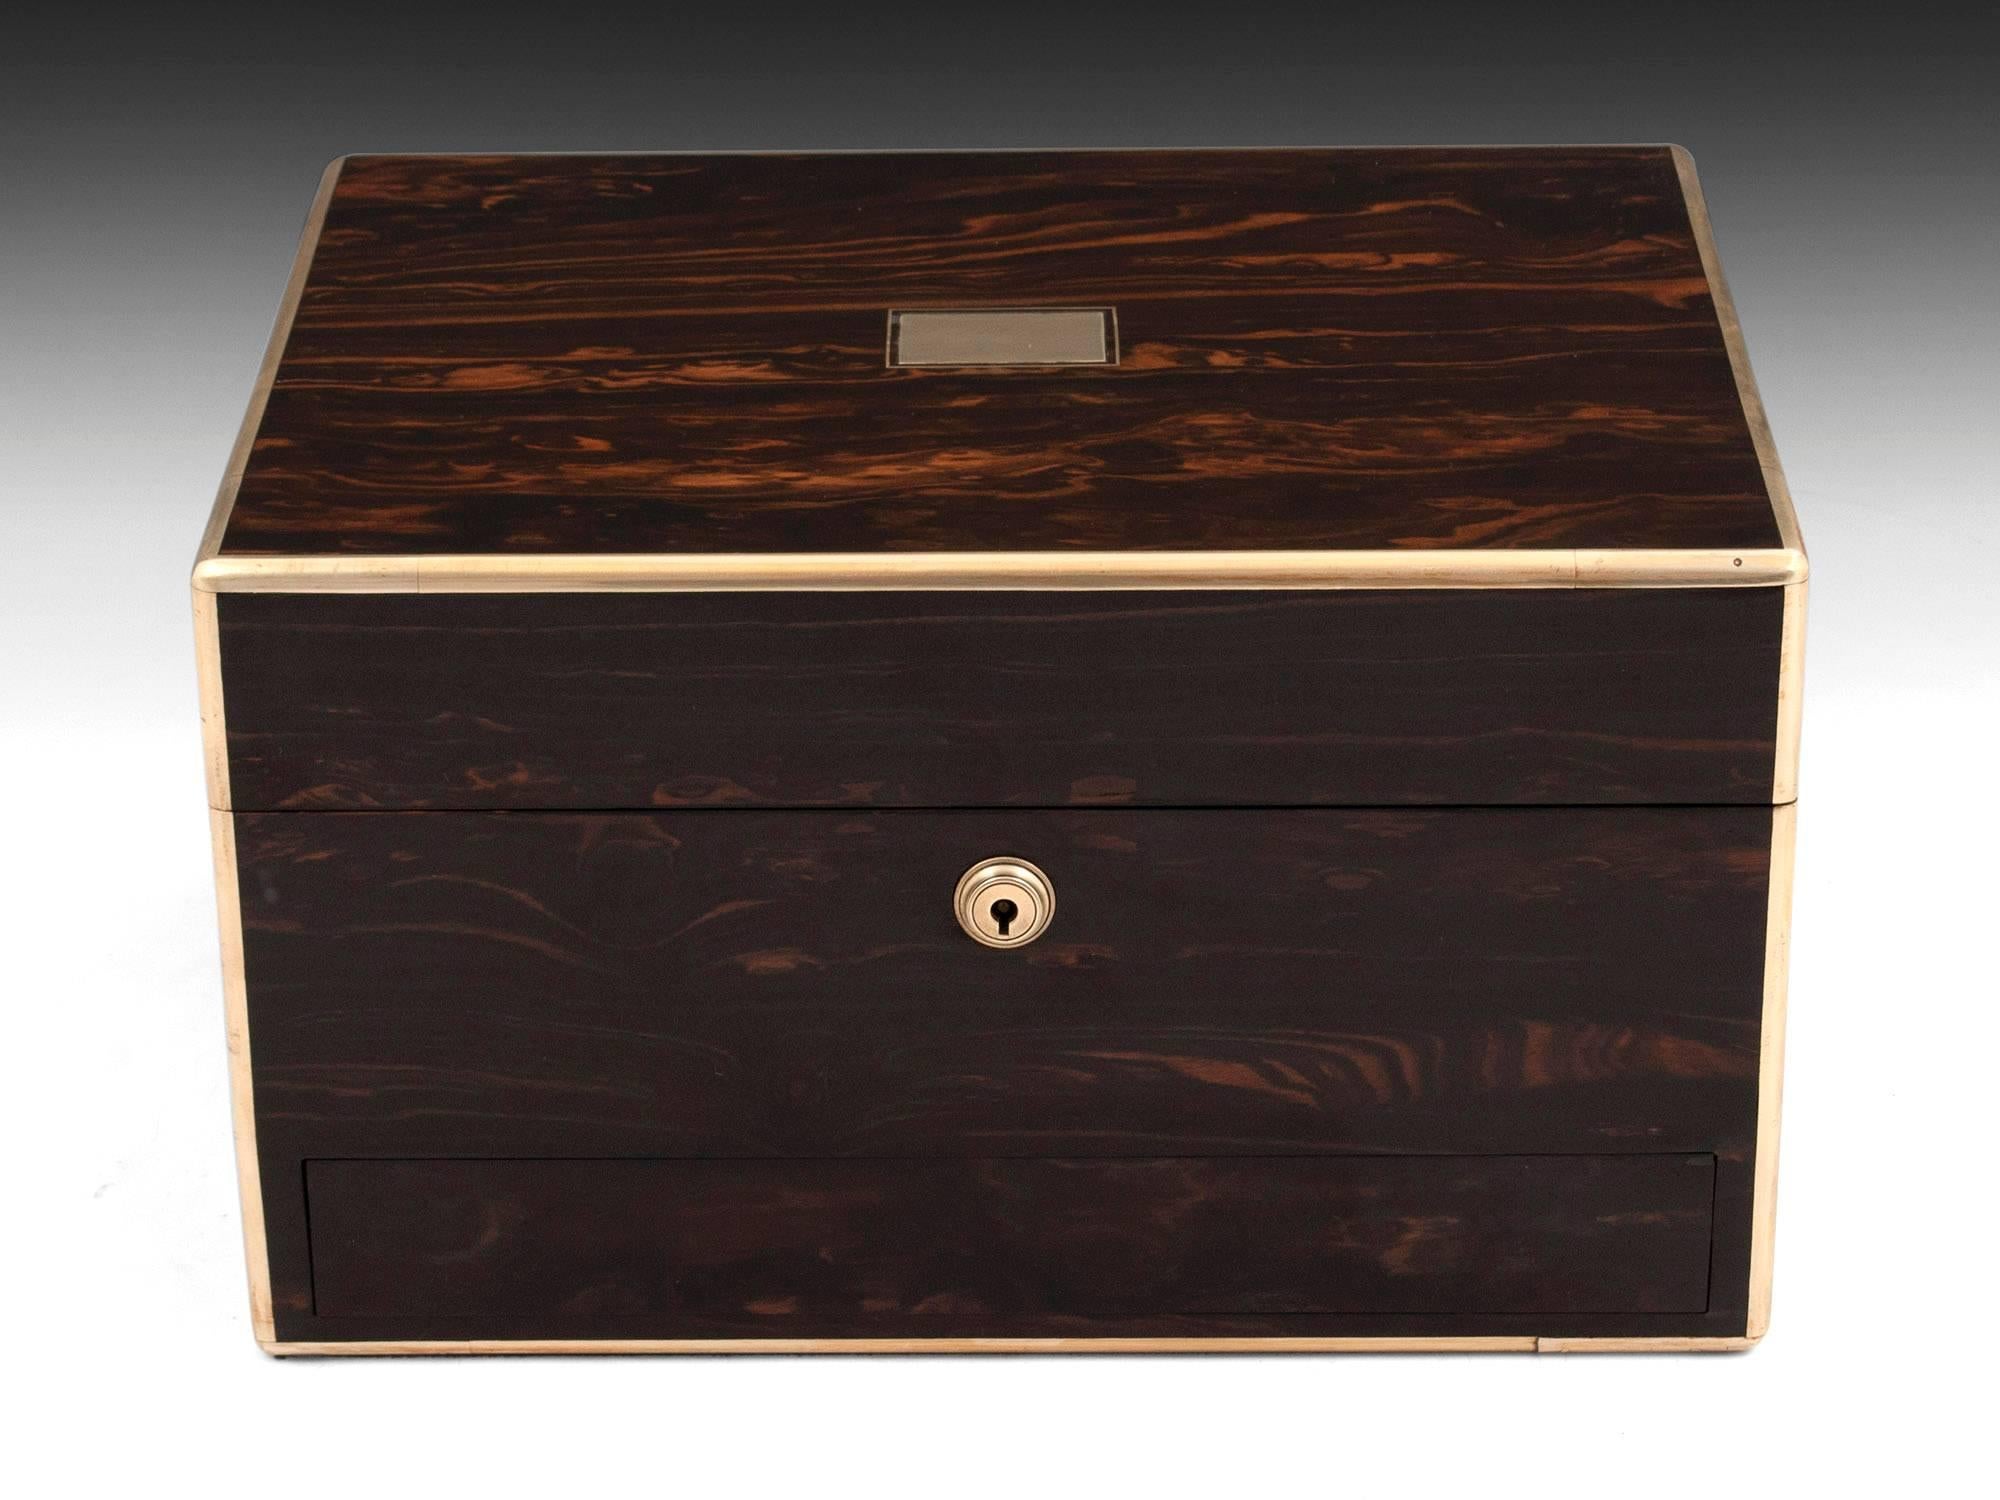 Coromandel jewellery box with brass edging, escutcheon and flush fitting carry handles. 

The interior is lined with black leather paper, with gold tooling on the edges, complemented by luxurious padded burgundy silk velvet. Featuring a removable